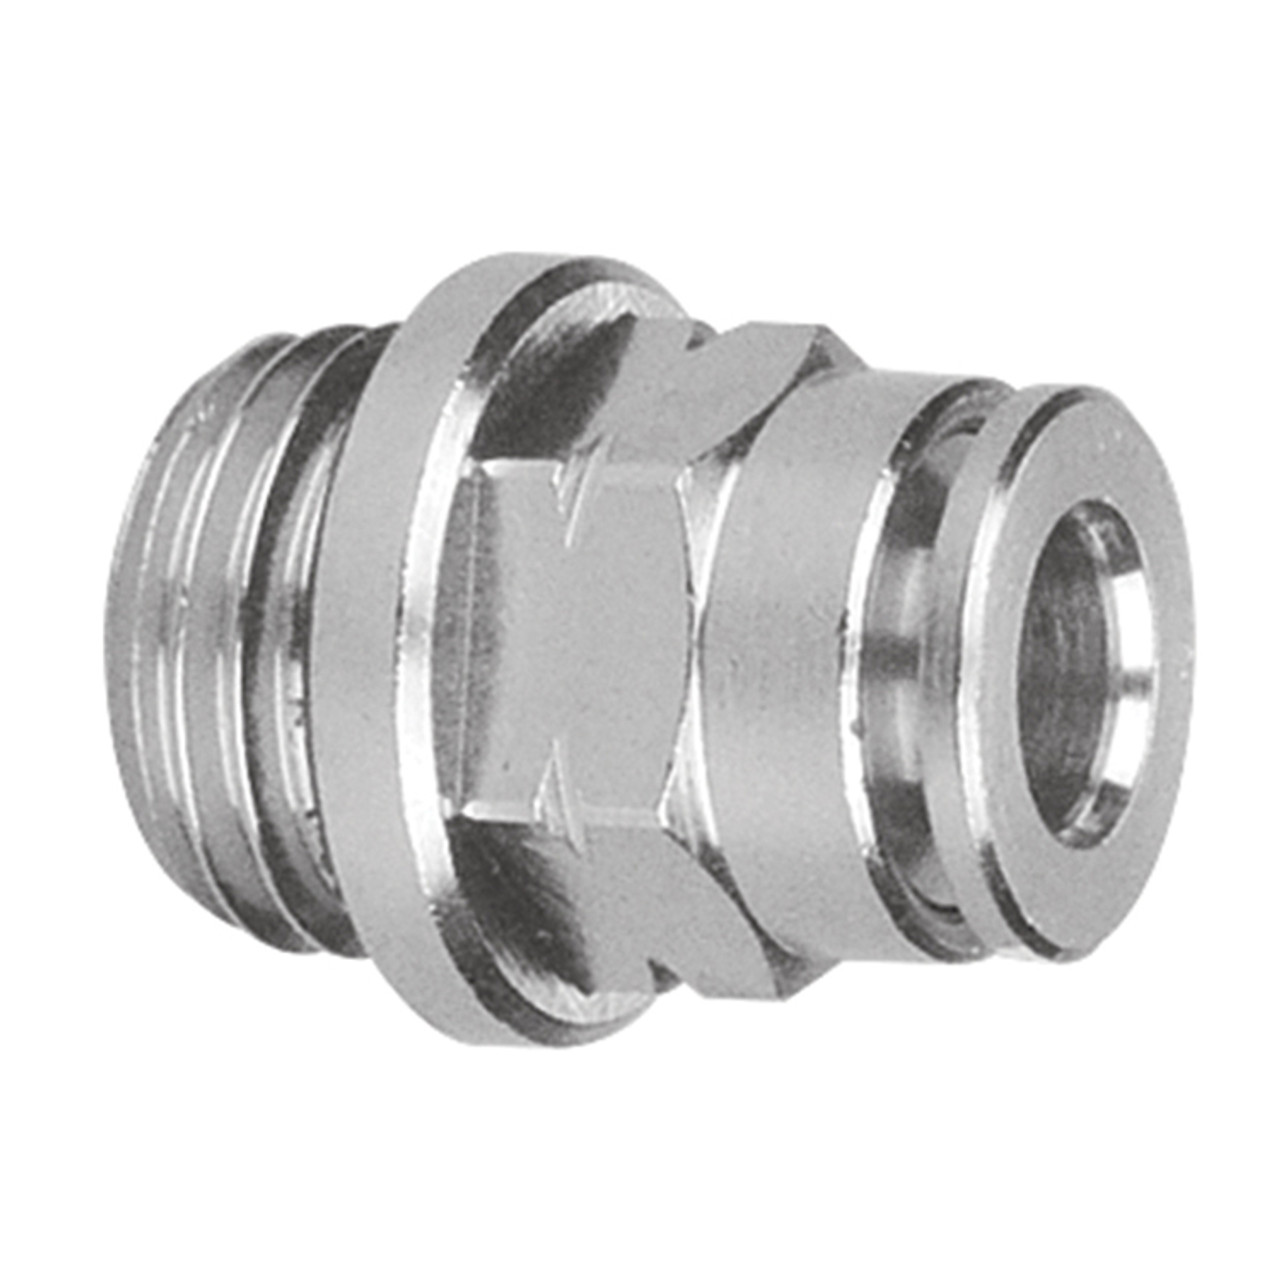 1/8 x 6mm Nickel Plated Brass Uni Thread - Push-To-Connect Connector   G60018PM-02-06M